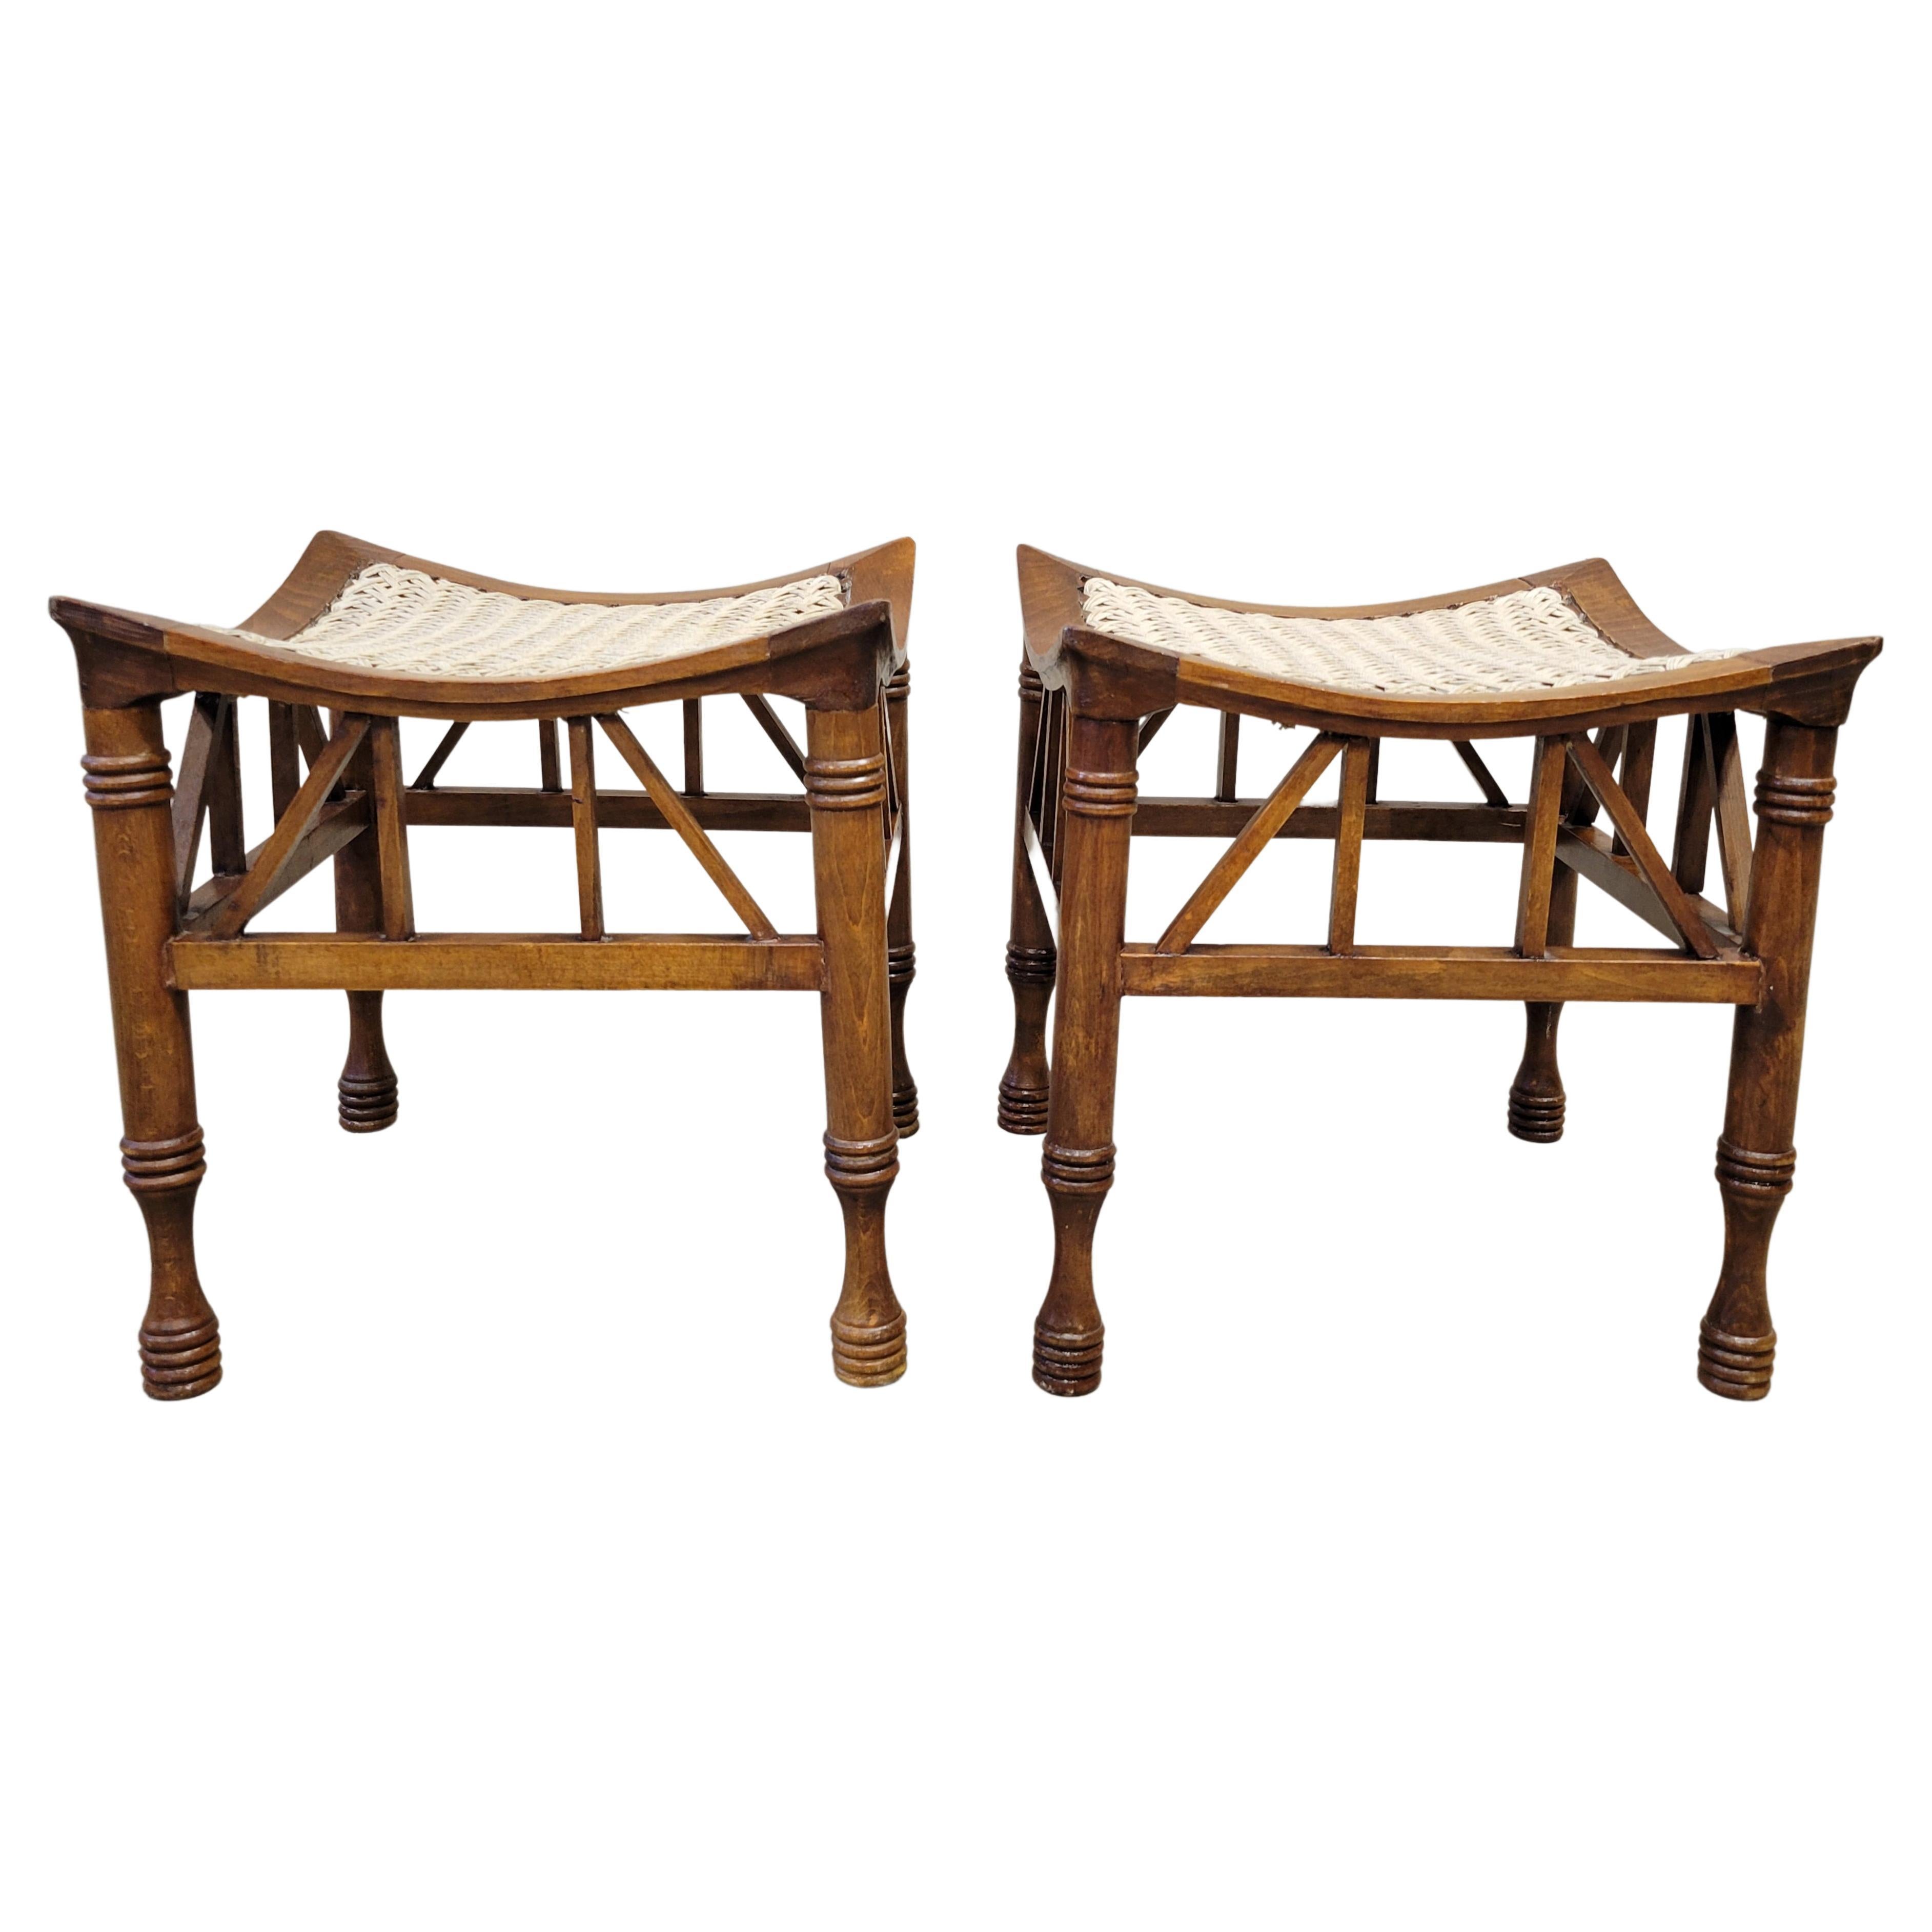 Antique Egyptian Revival Thebes Stools with Woven Cord Seats by Liberty & Co